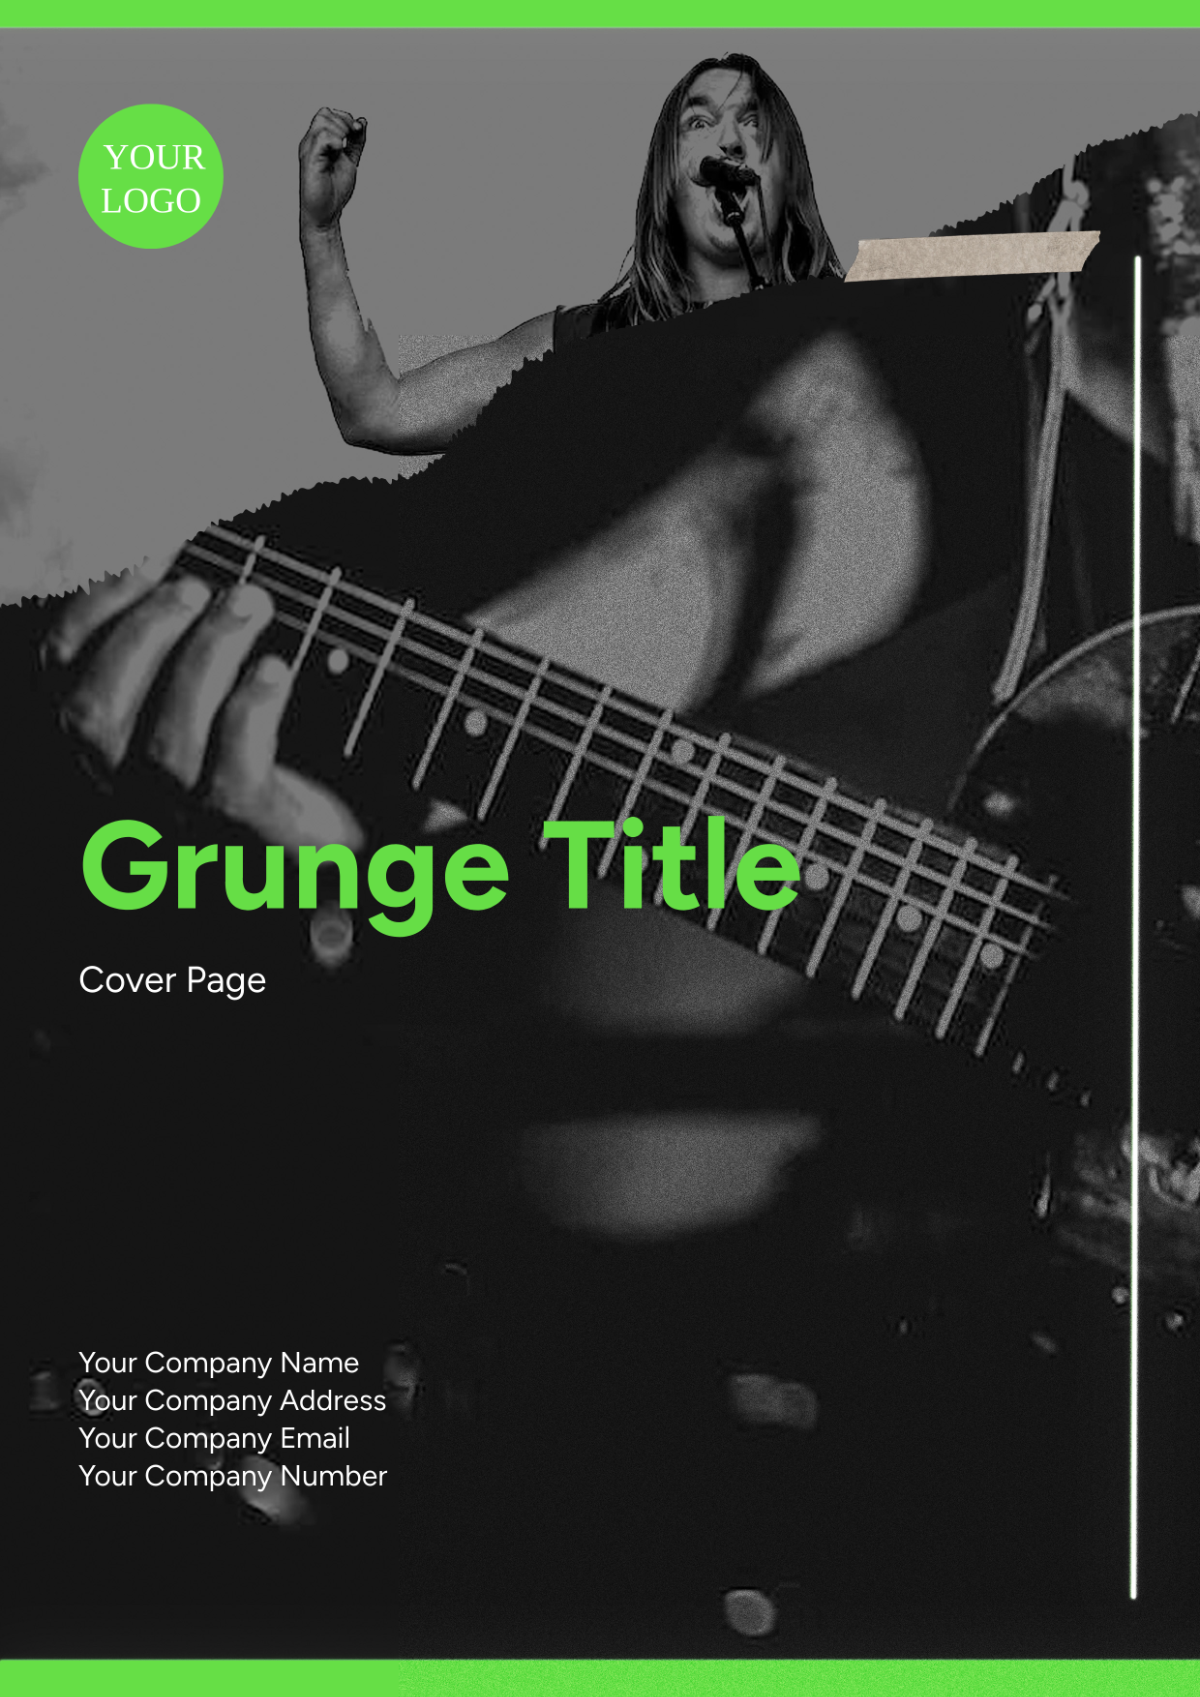 Grunge Title Cover Page